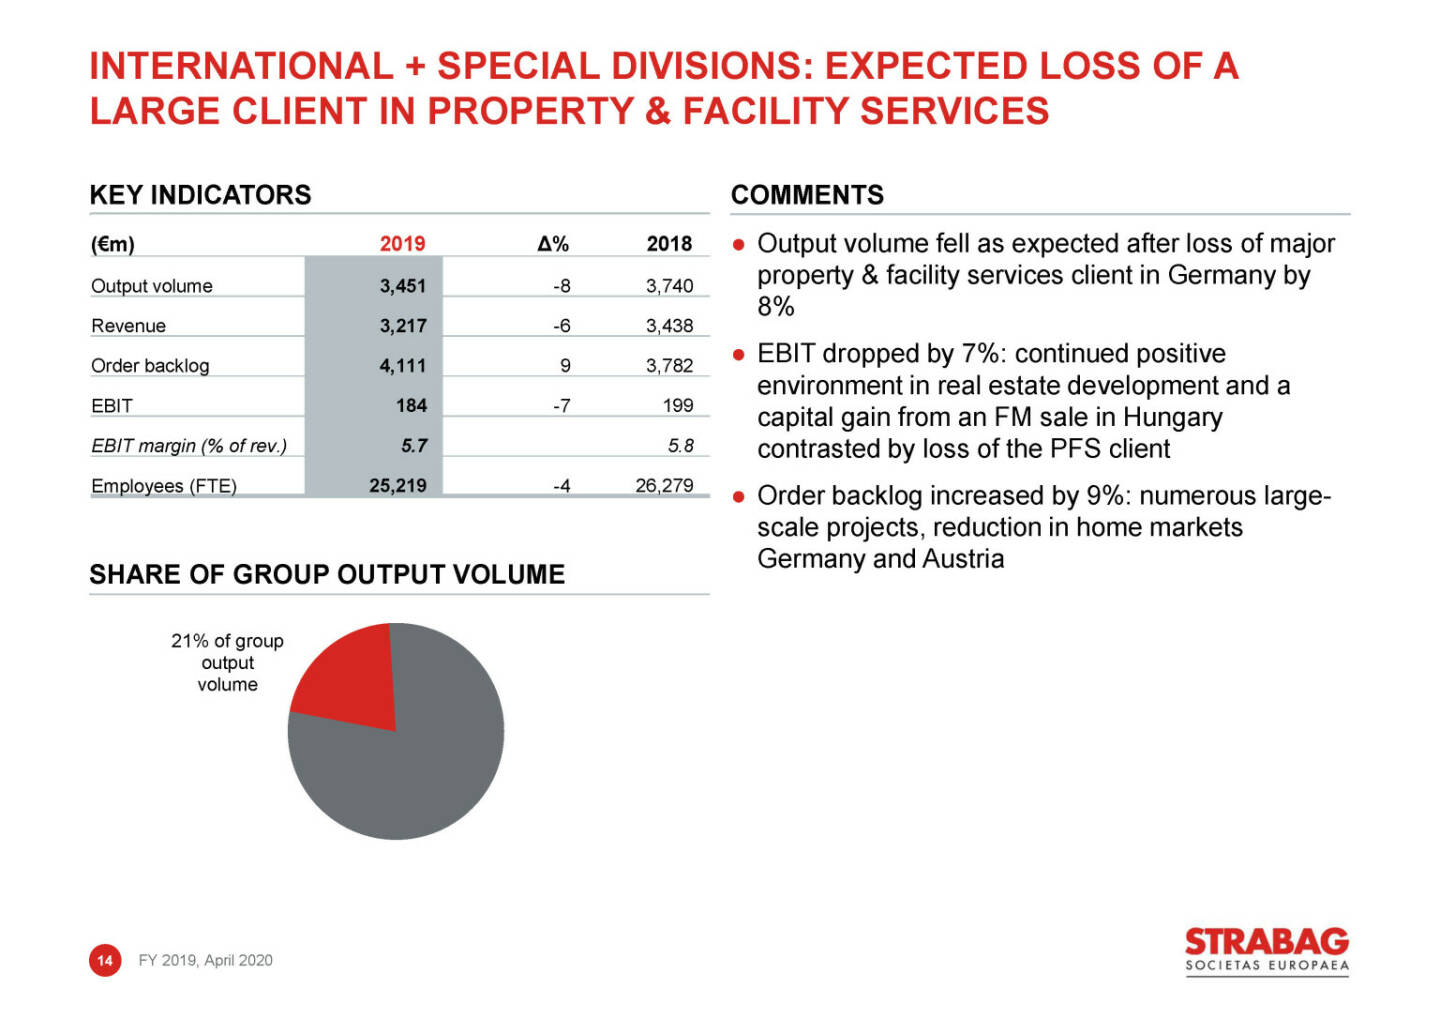 Strabag - international + special divisions: expected loss of a large client in property & facility services